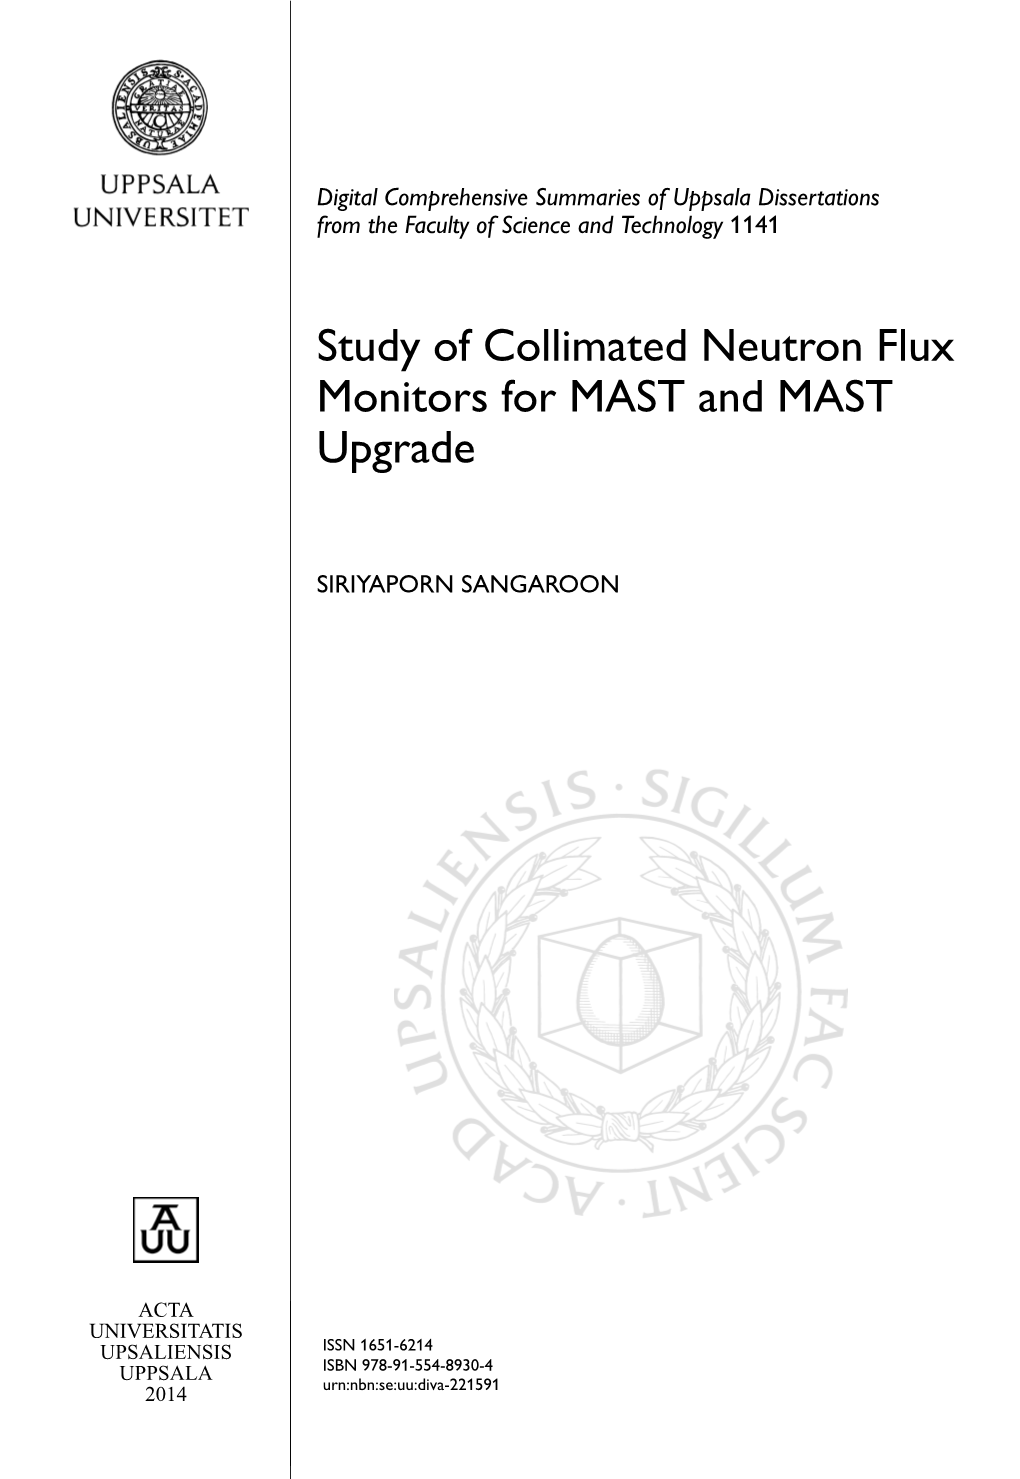 Study of Collimated Neutron Flux Monitors for MAST and MAST Upgrade